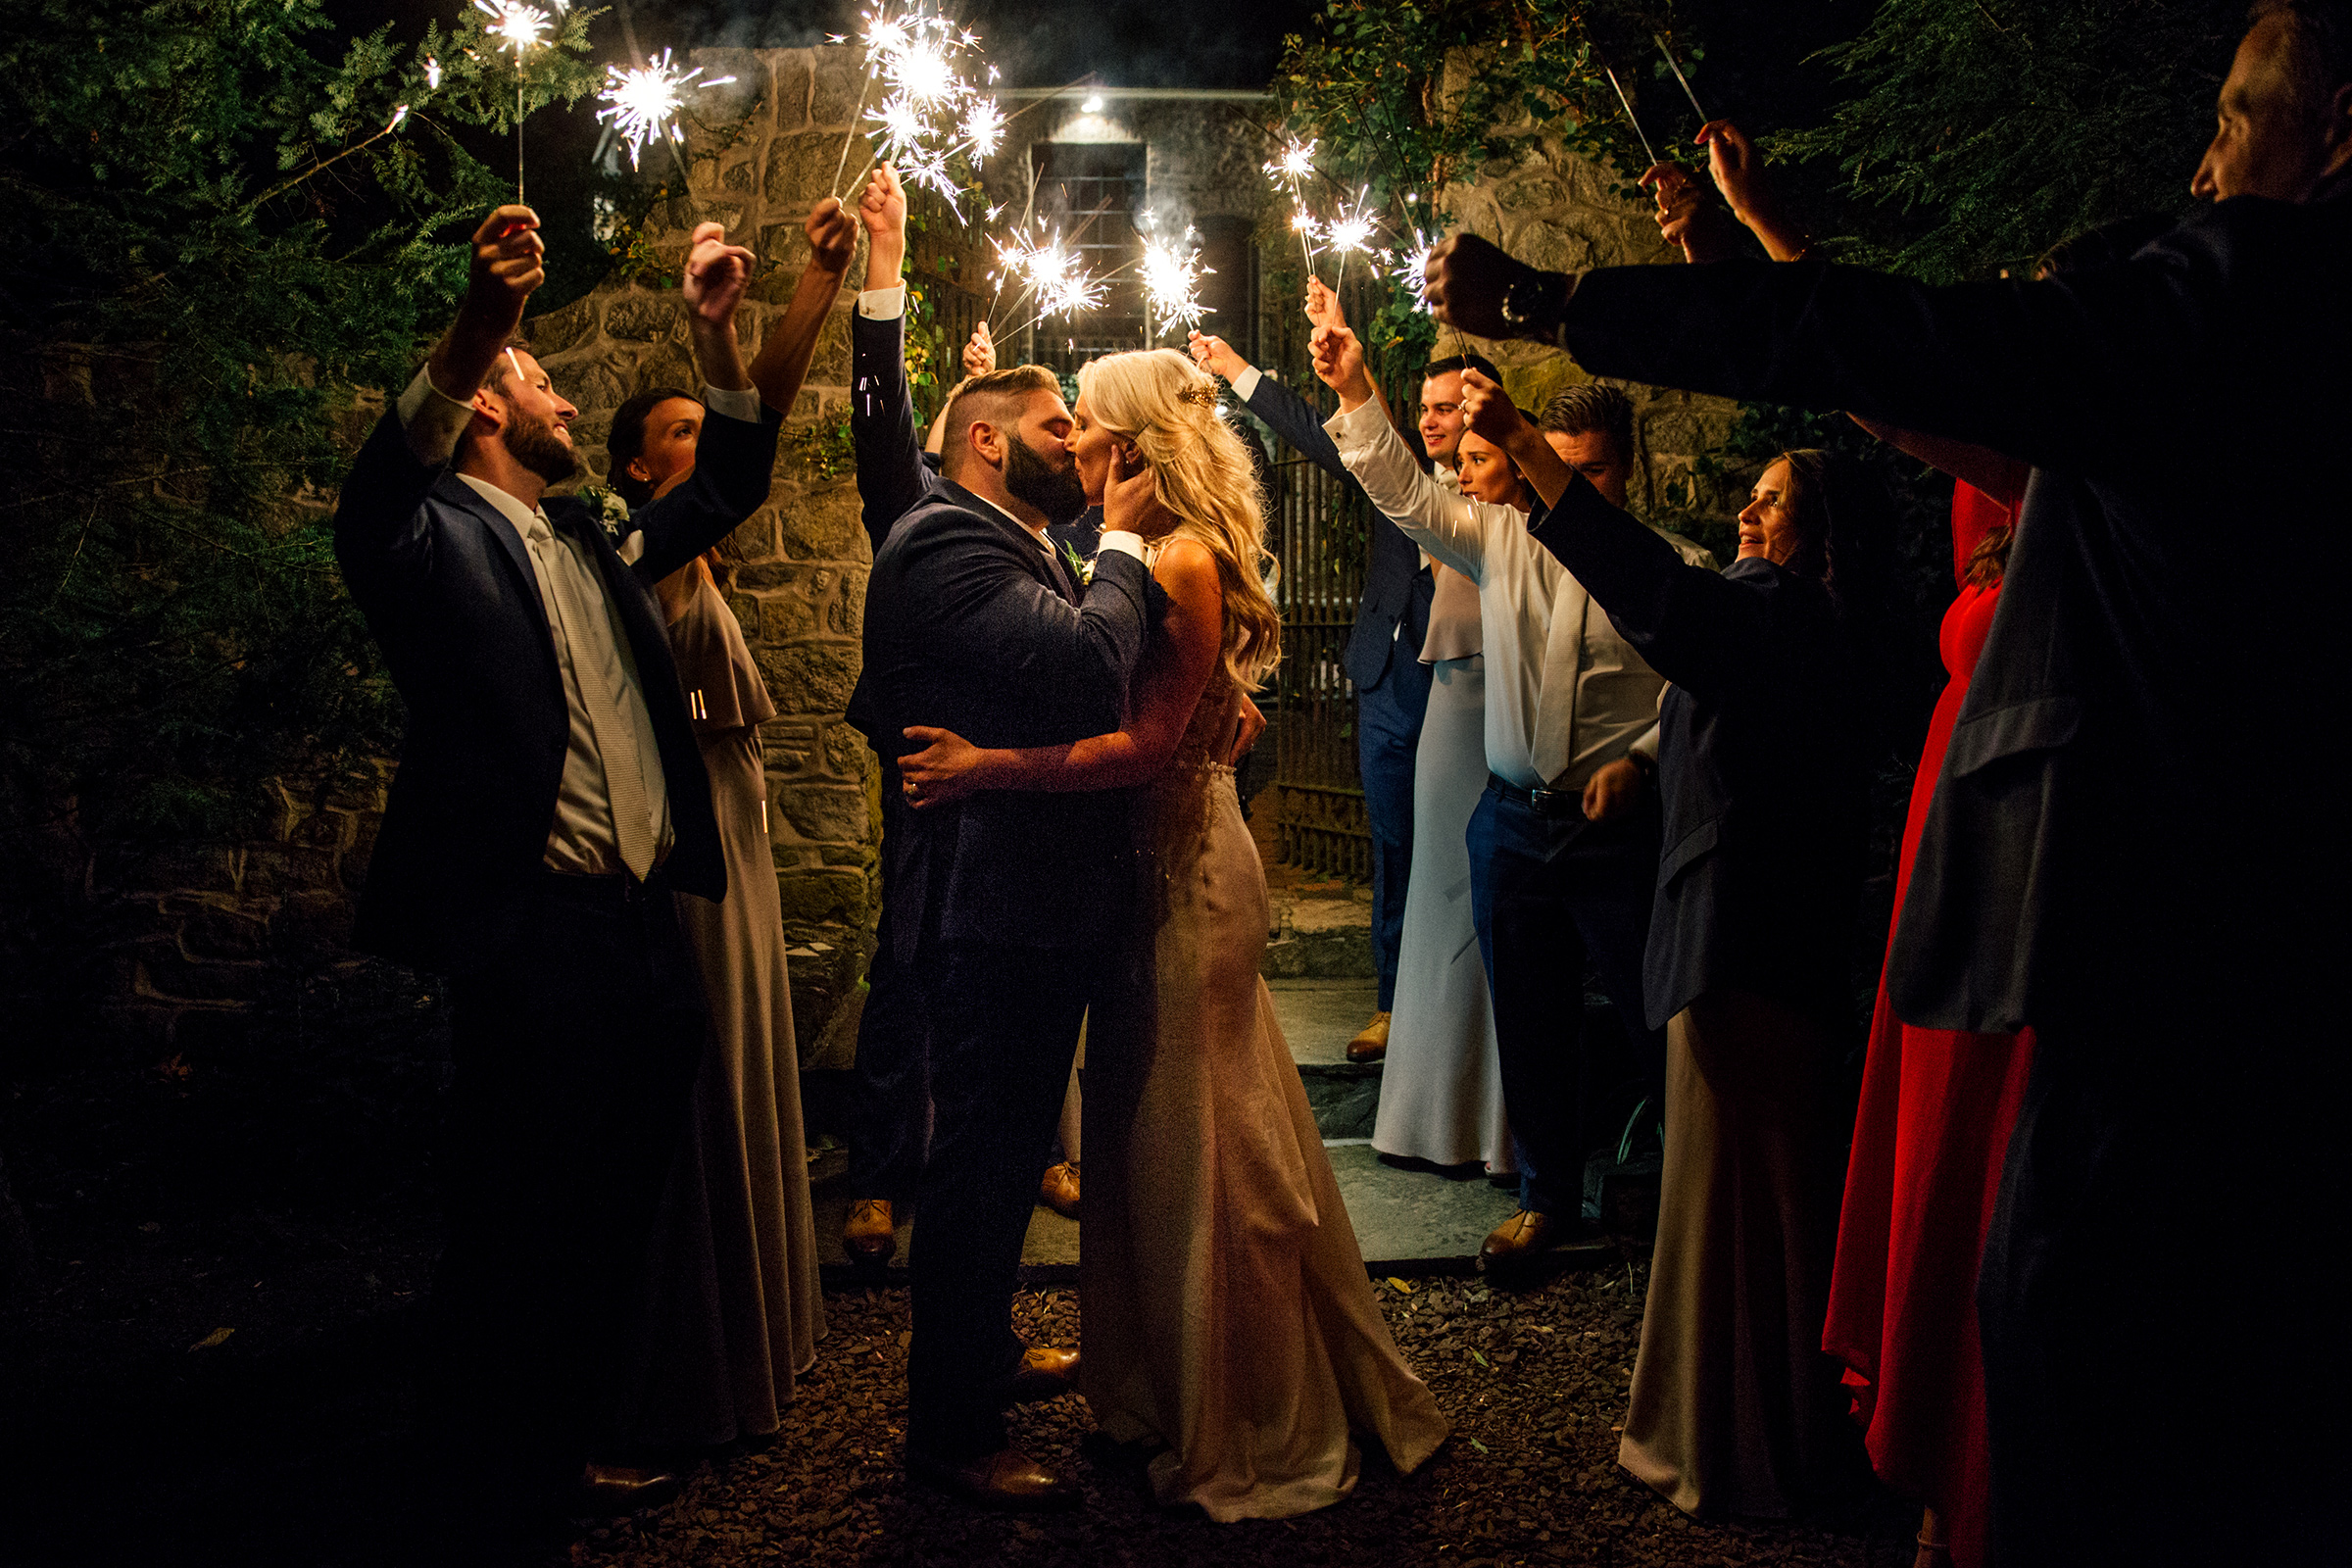 sparklers-backyard-soul-wedding-travel-intimate-natural-candid-moments.jpg